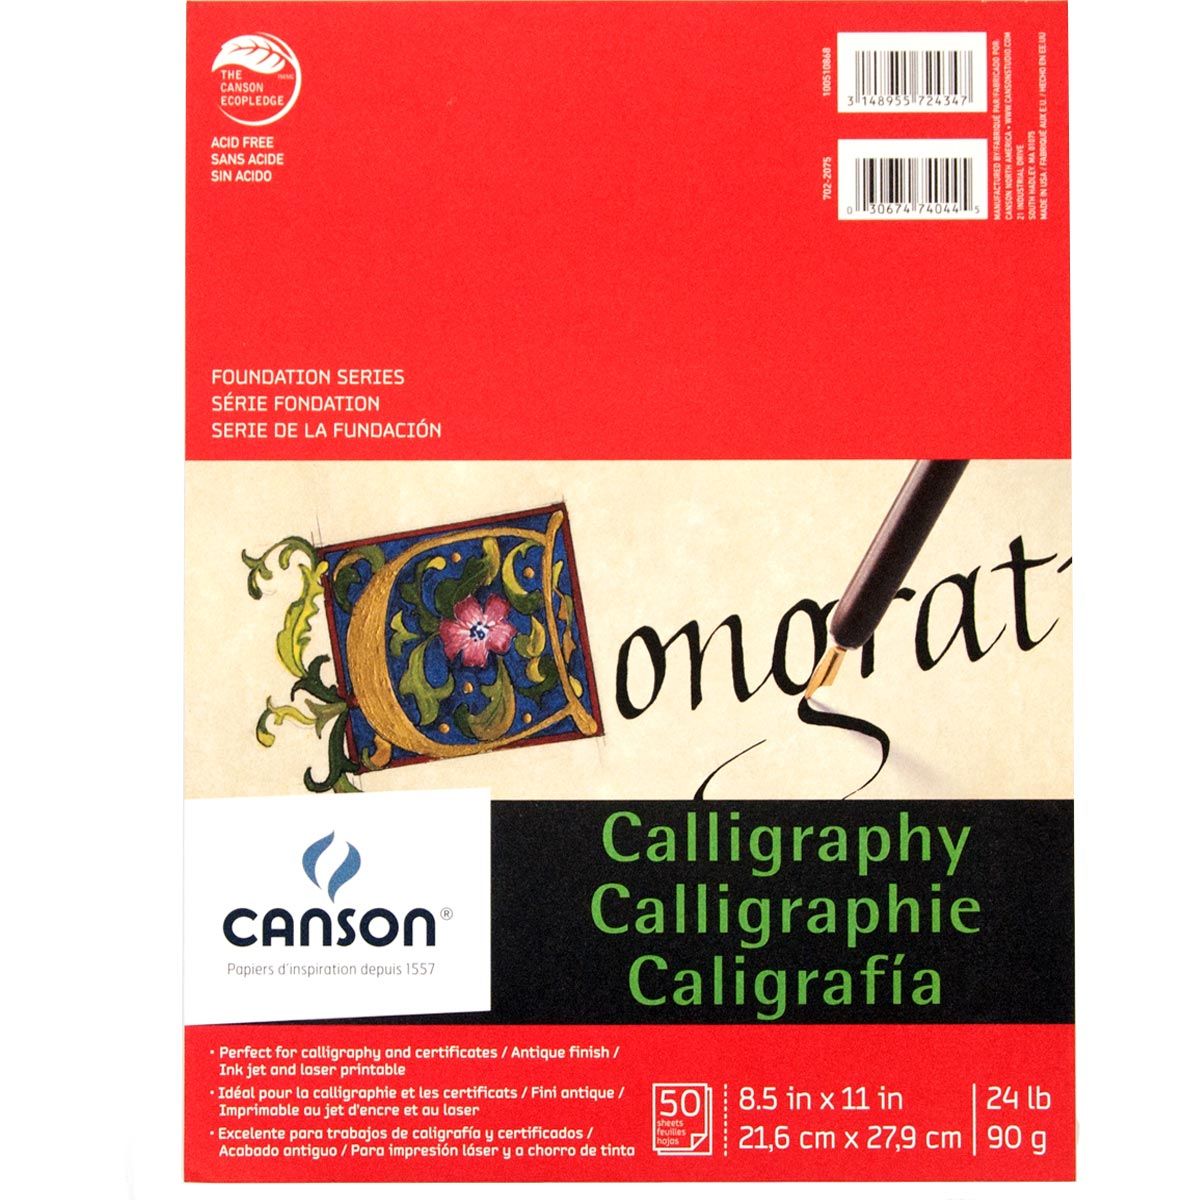 Canson Calligraphy Parchment Paper Pad 8.5" x 11" Assorted